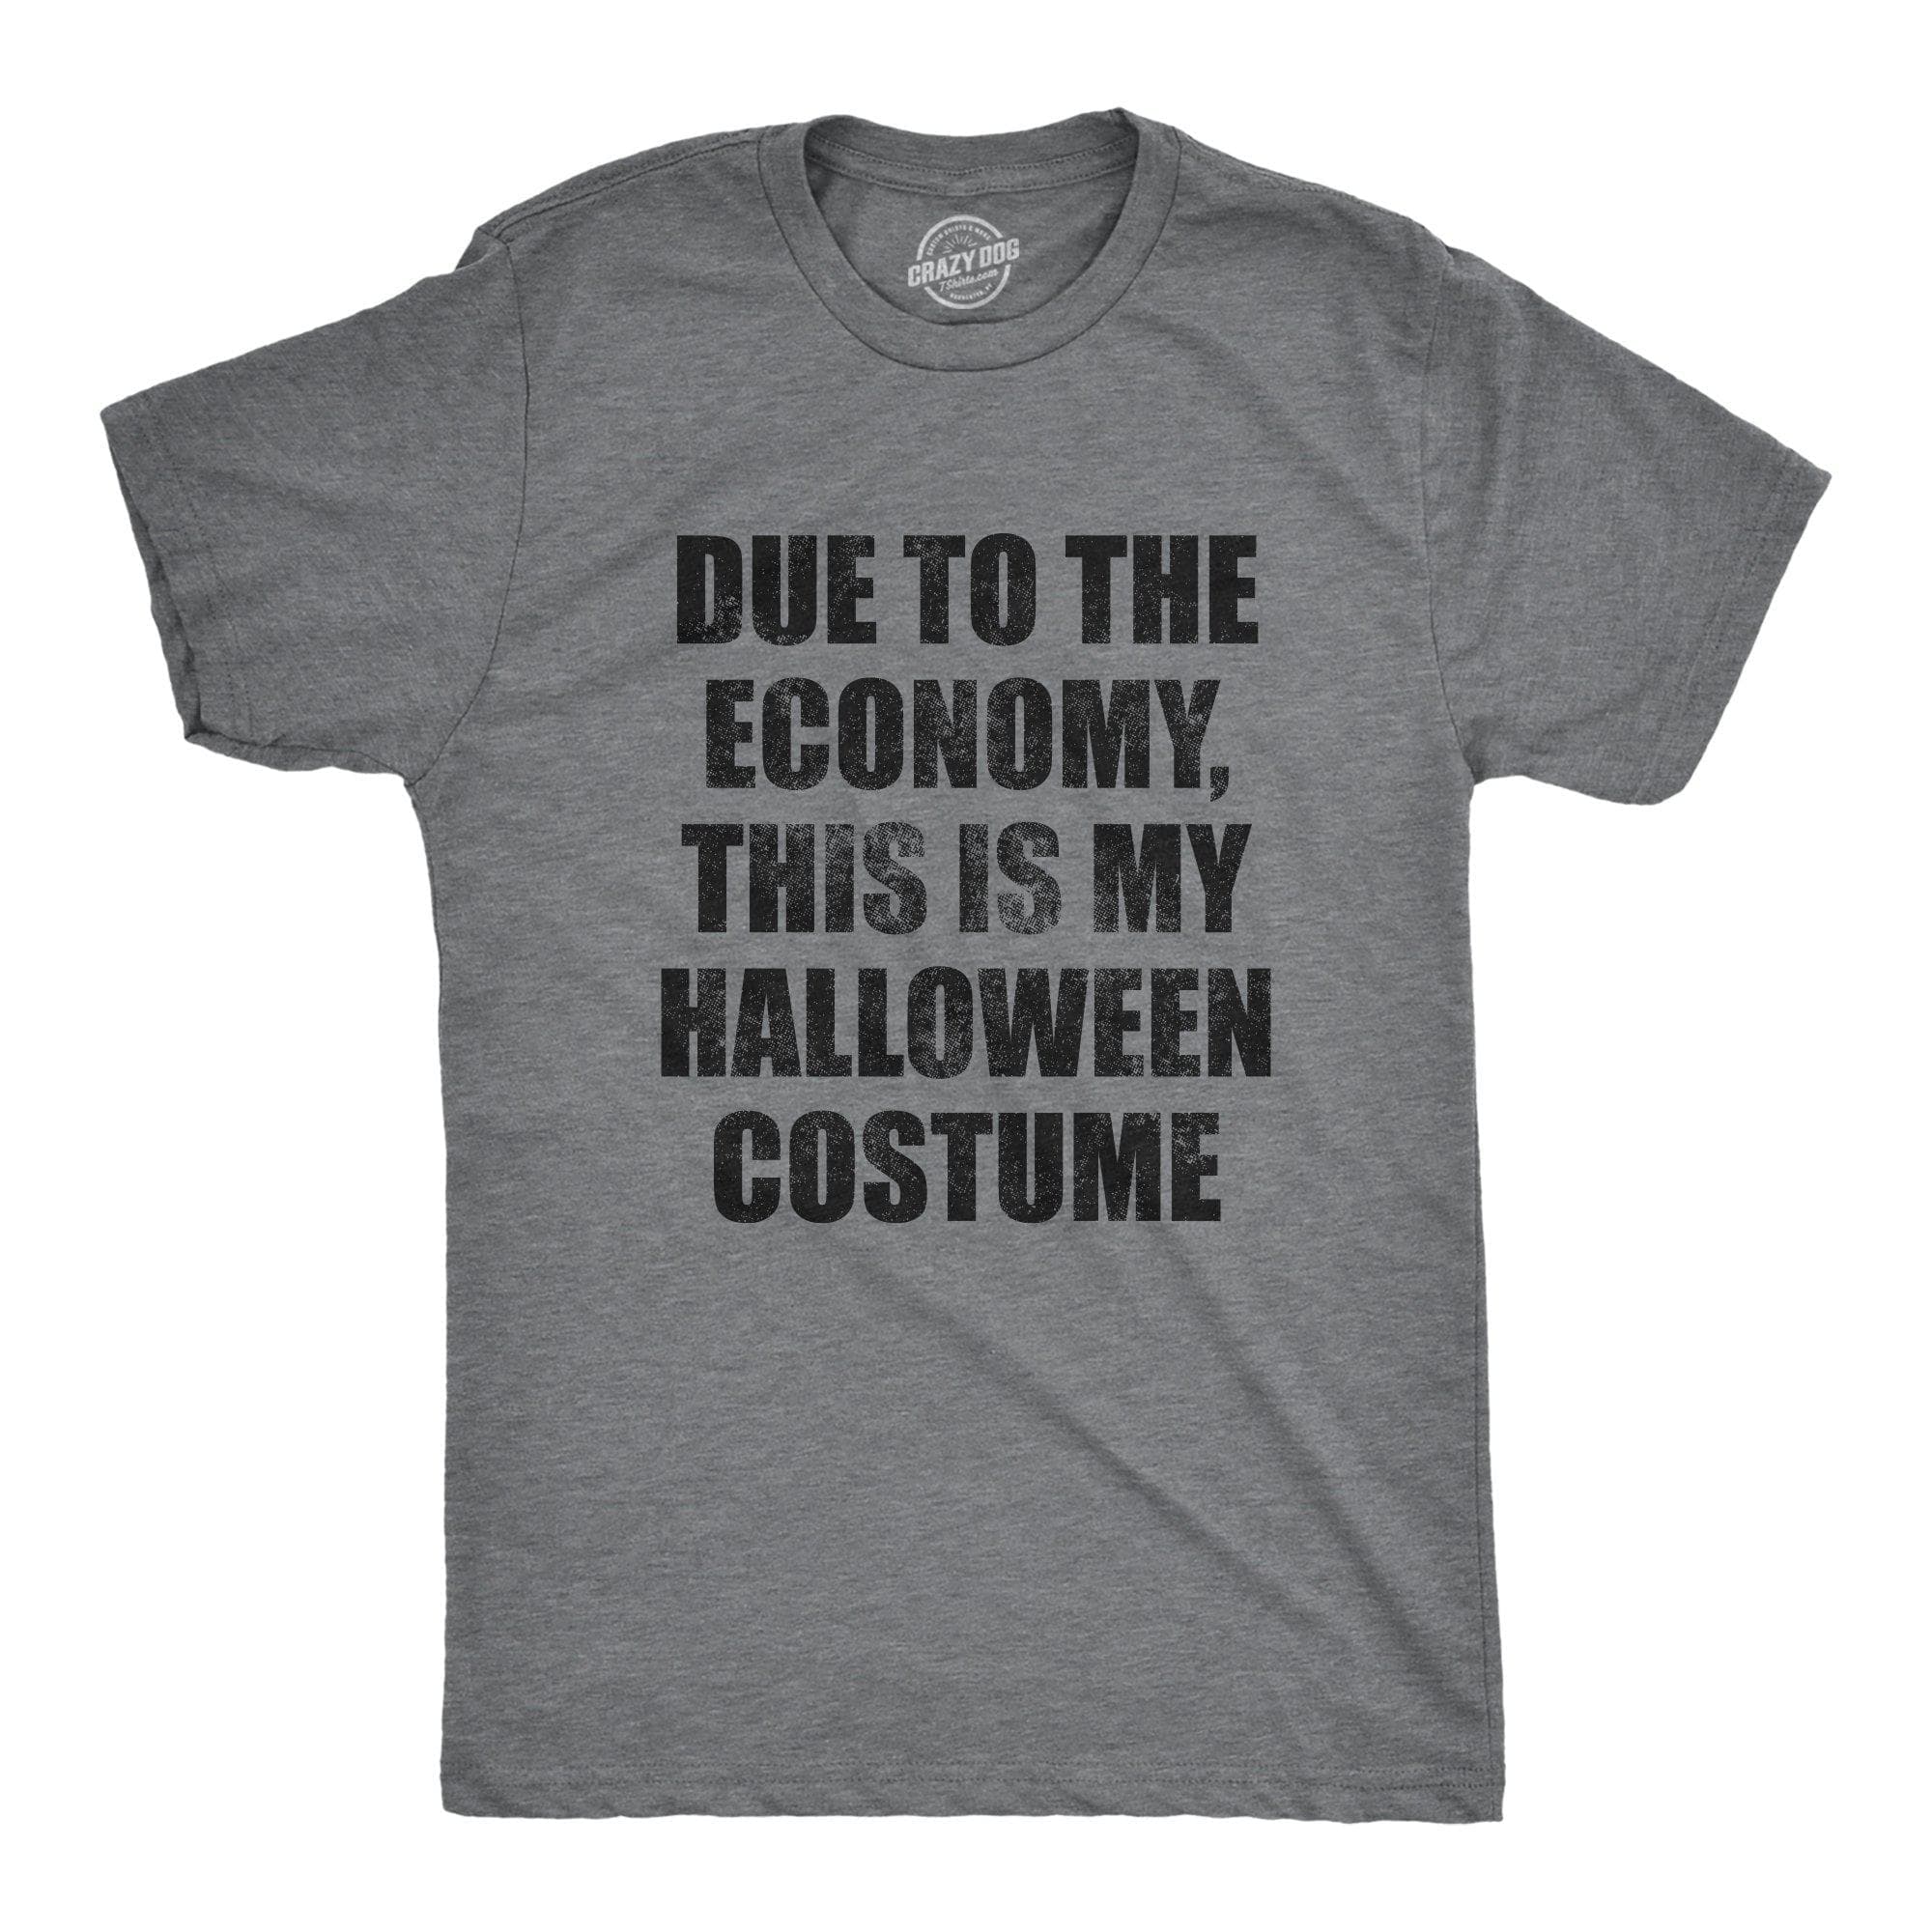 Due To The Economy This Is My Halloween Costume Men's Tshirt - Crazy Dog T-Shirts